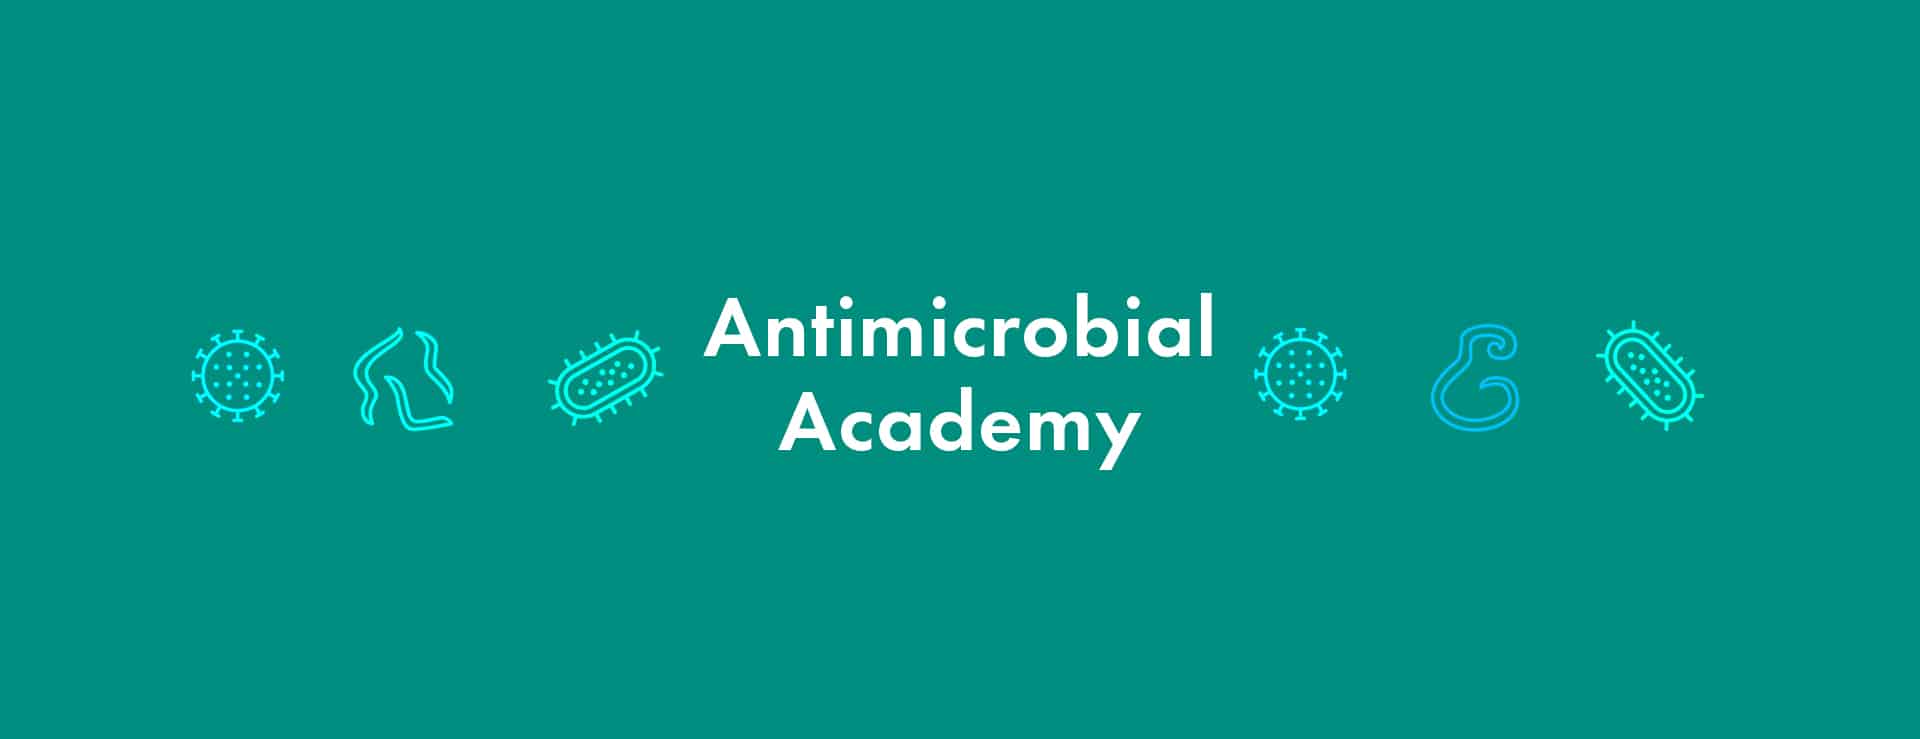 Antimicrobial Academy - Tile image5